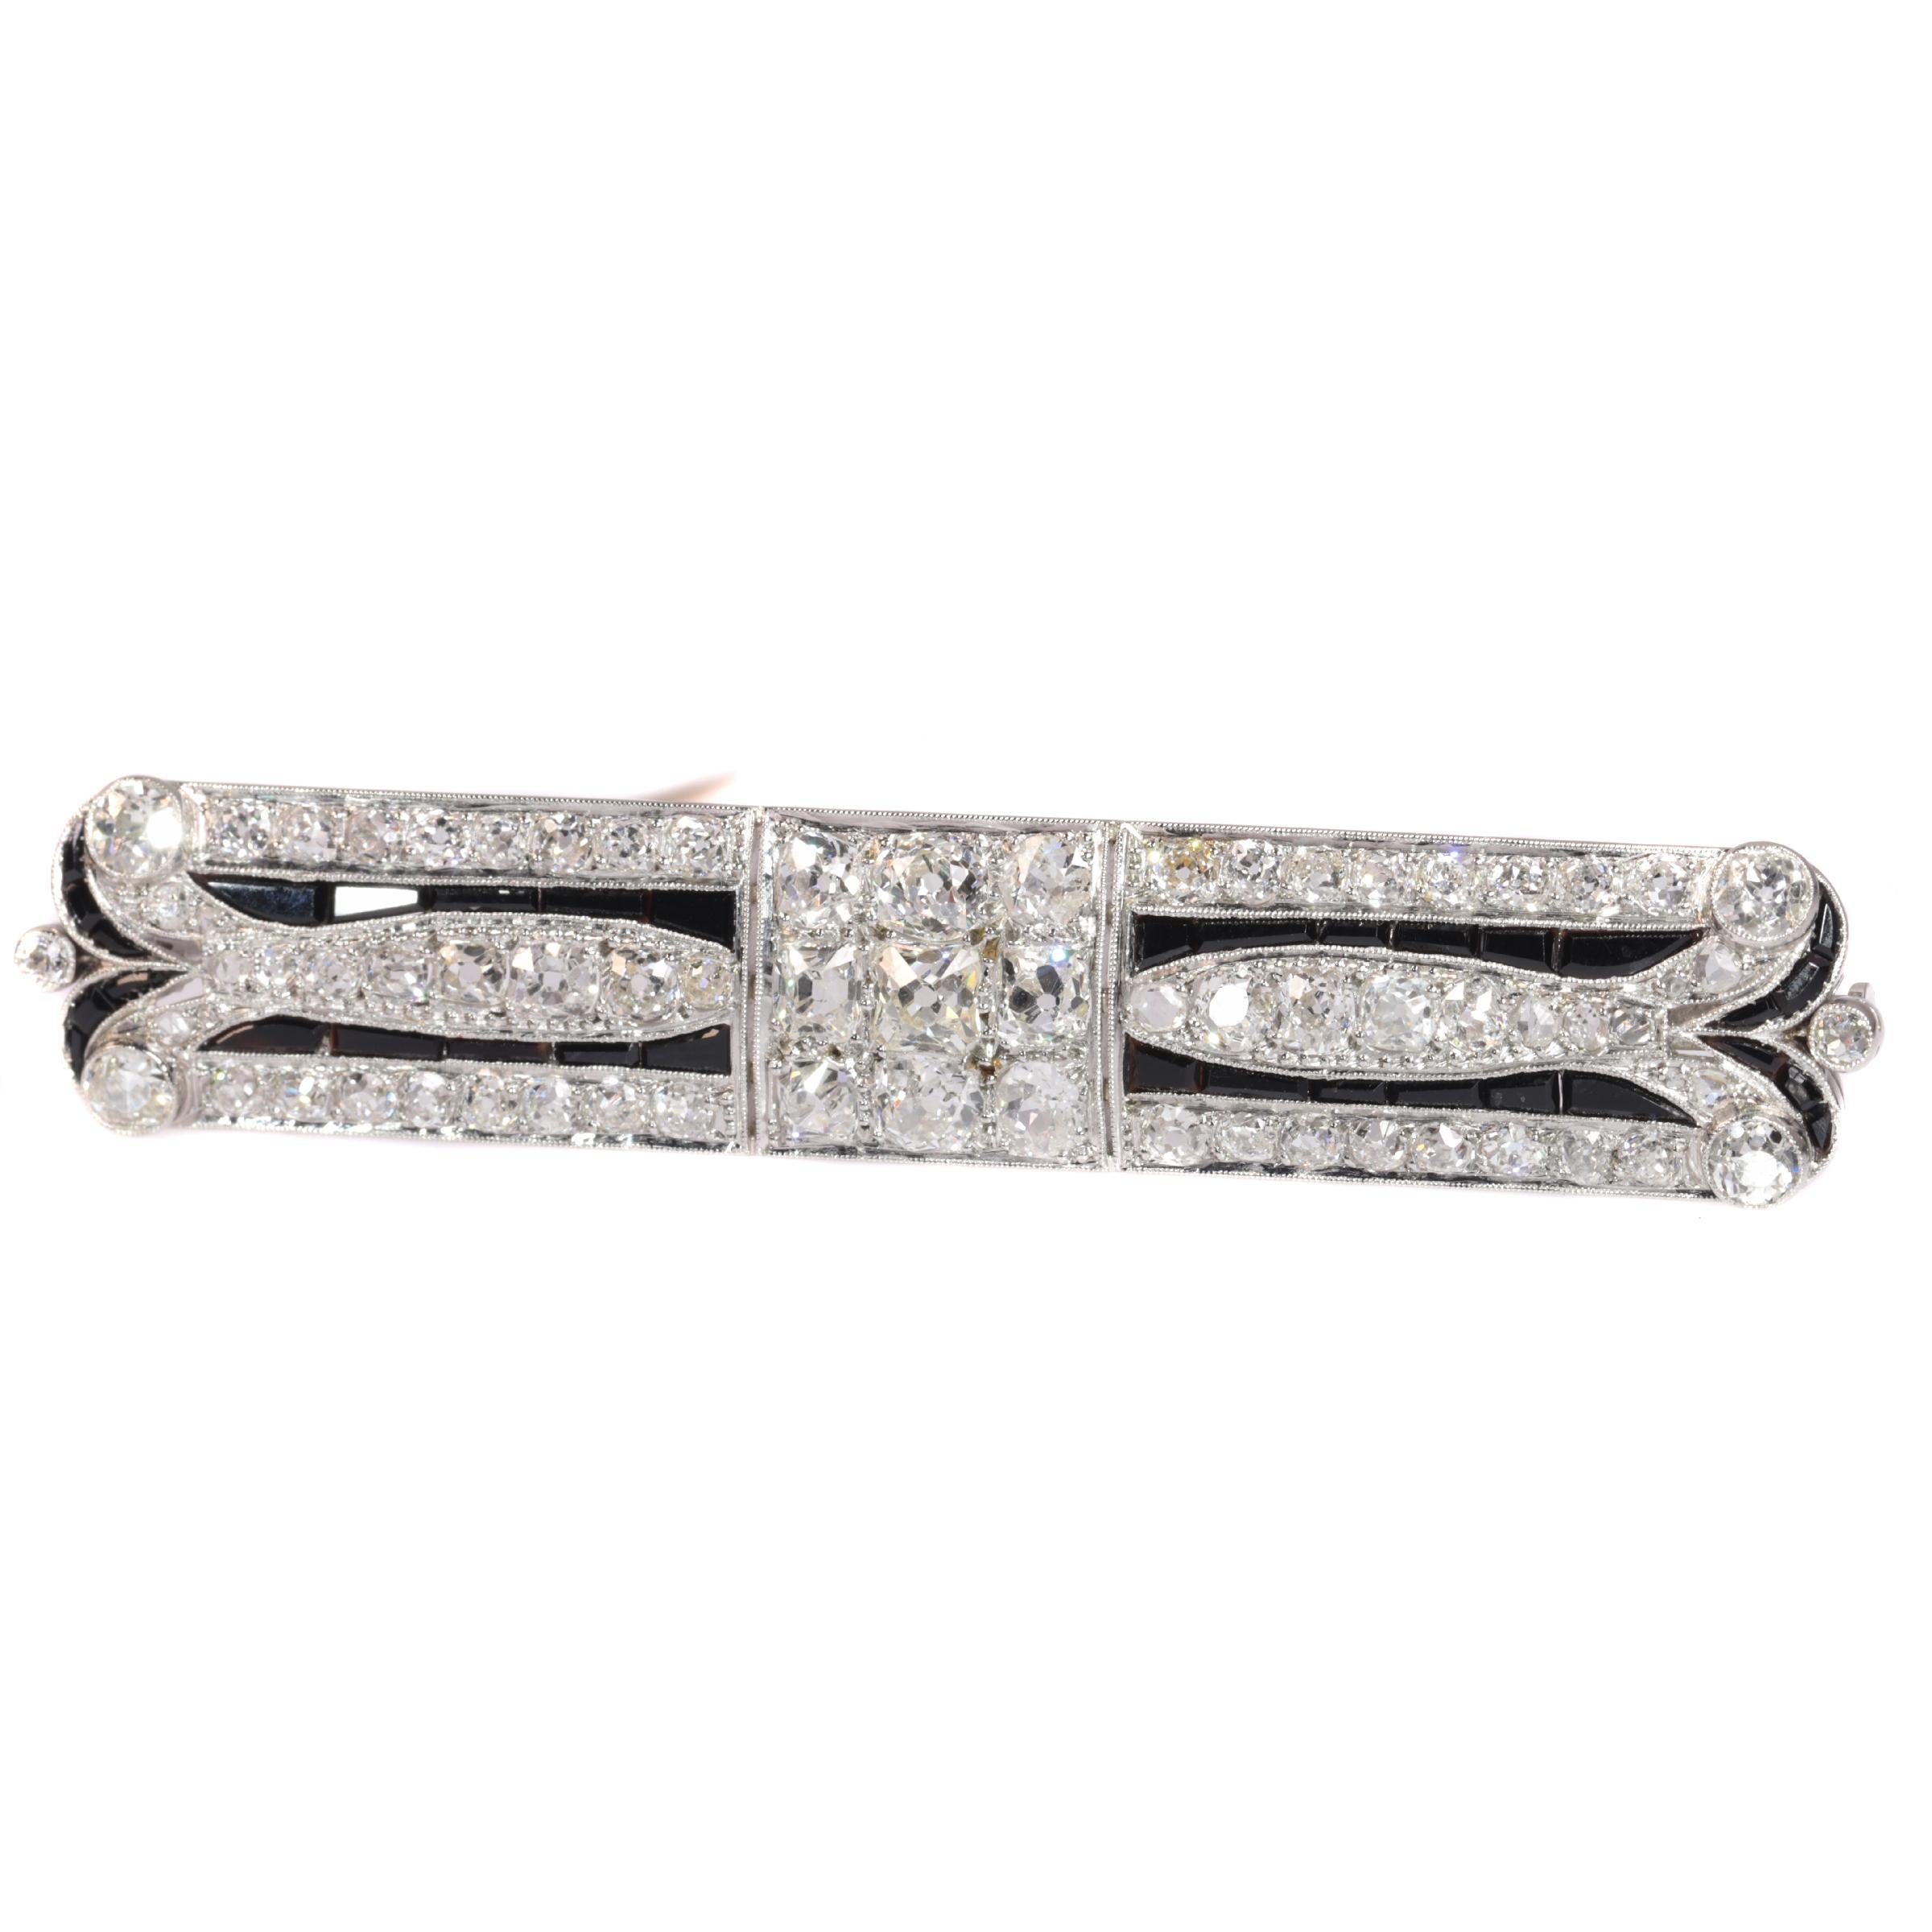 Diamond Loaded Strong Stylish Platinum Art Deco Brooch with over 7 crts Diamonds In Excellent Condition For Sale In Antwerp, BE